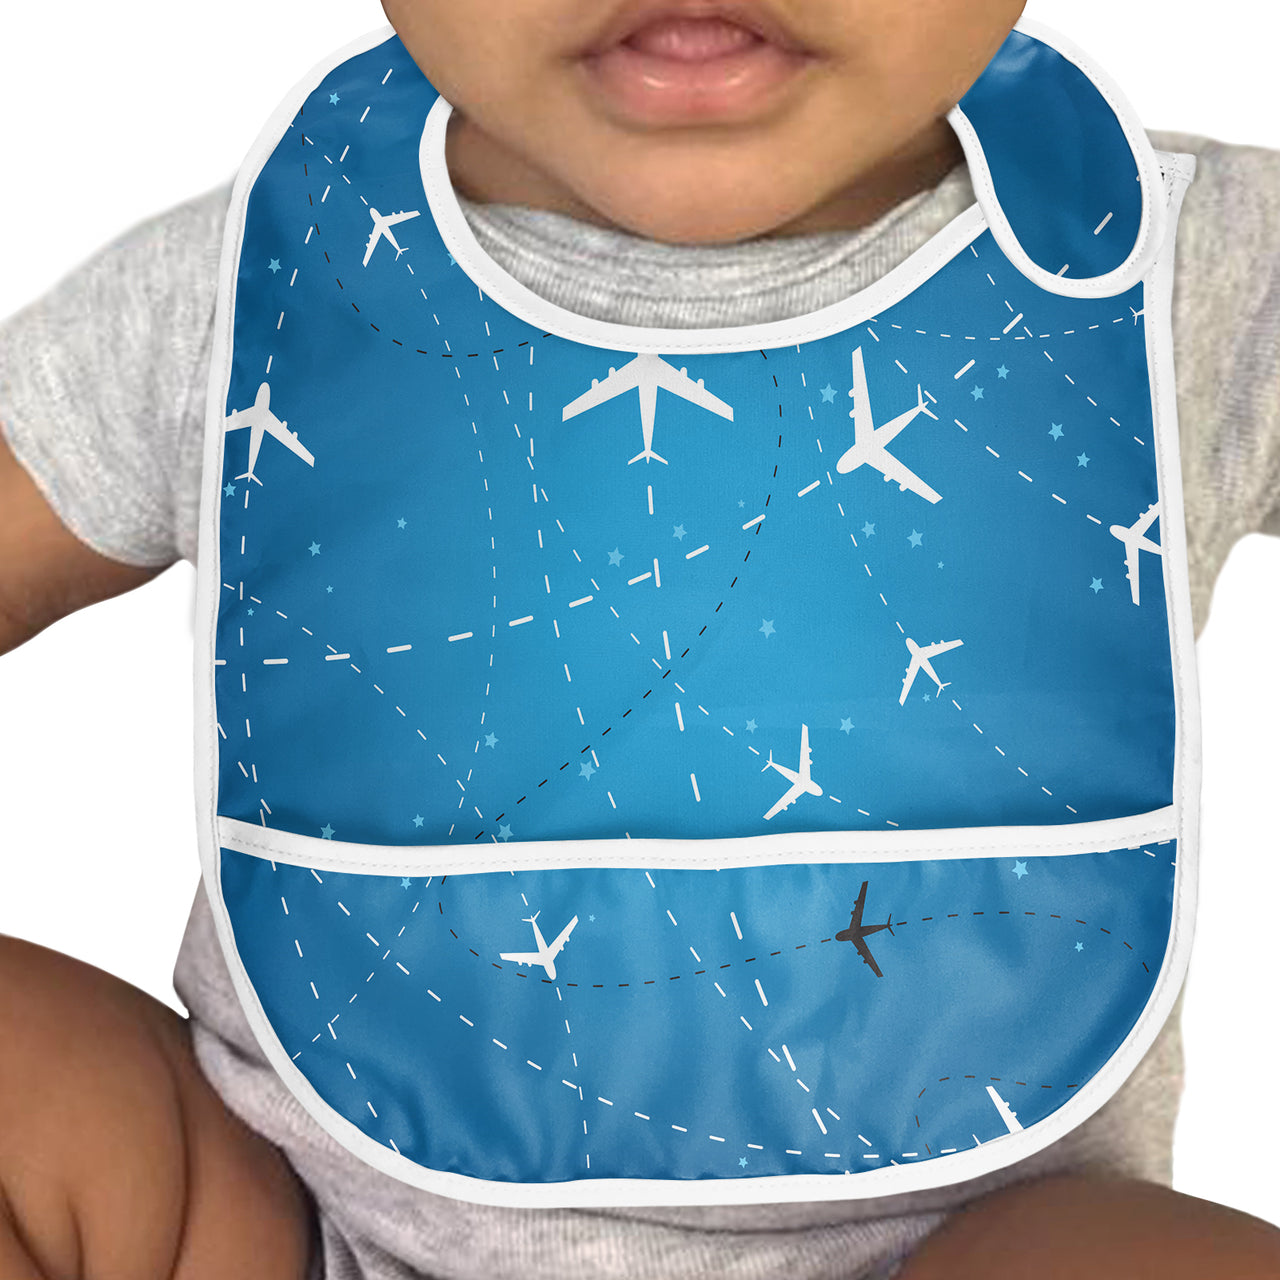 Travelling with Aircraft Designed Baby Bib